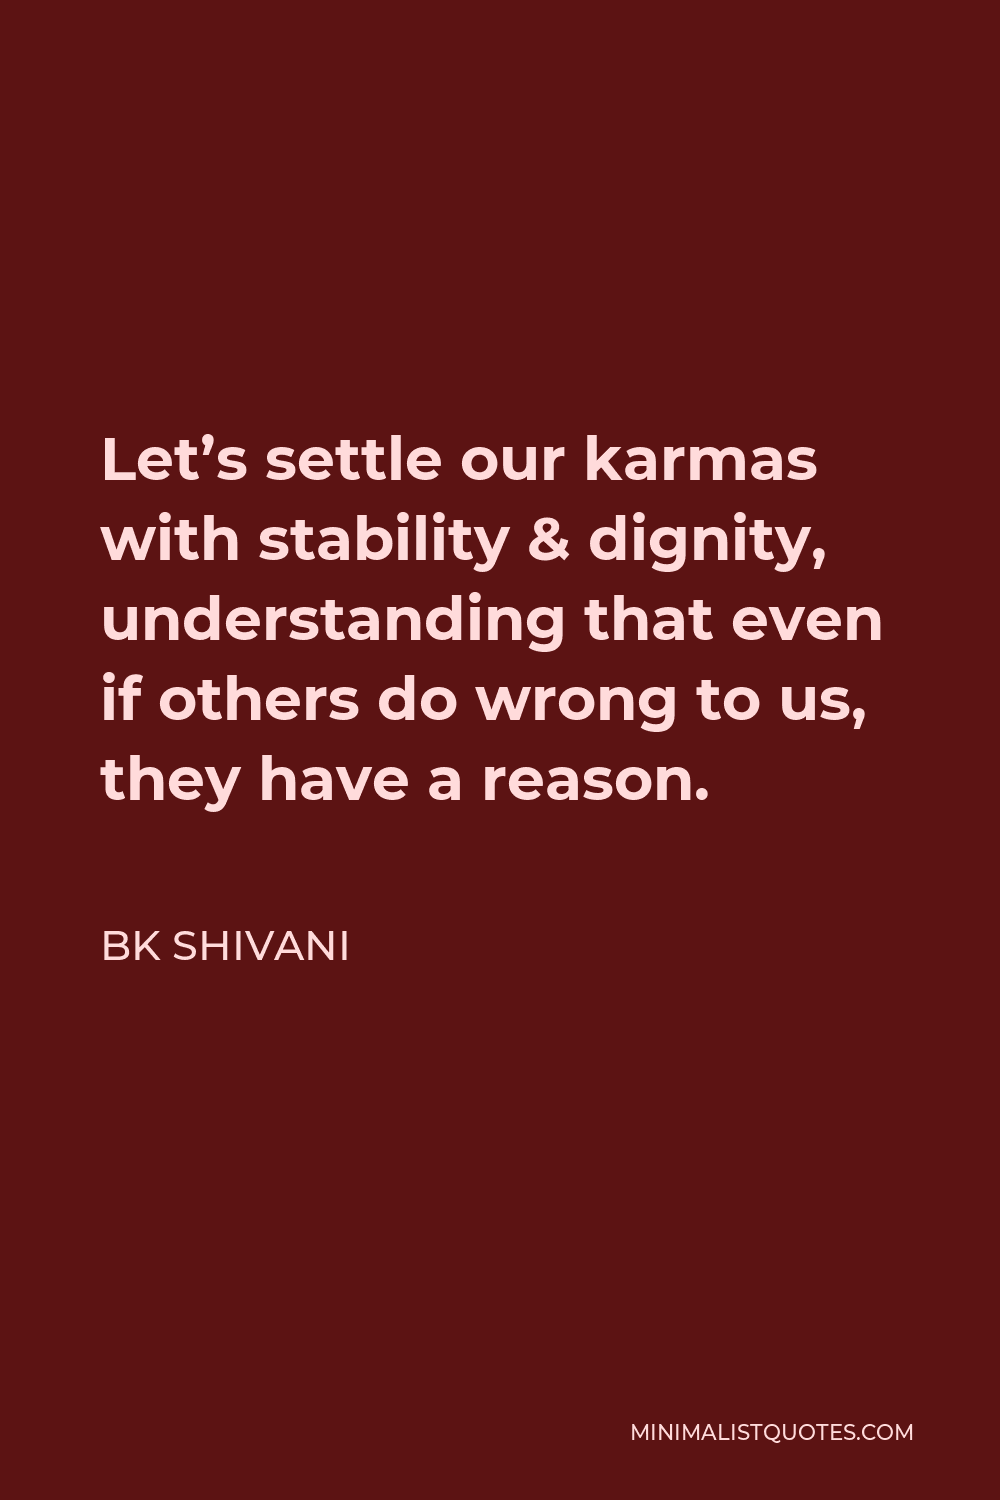 BK Shivani Quote - Let’s settle our karmas with stability & dignity, understanding that even if others do wrong to us, they have a reason.